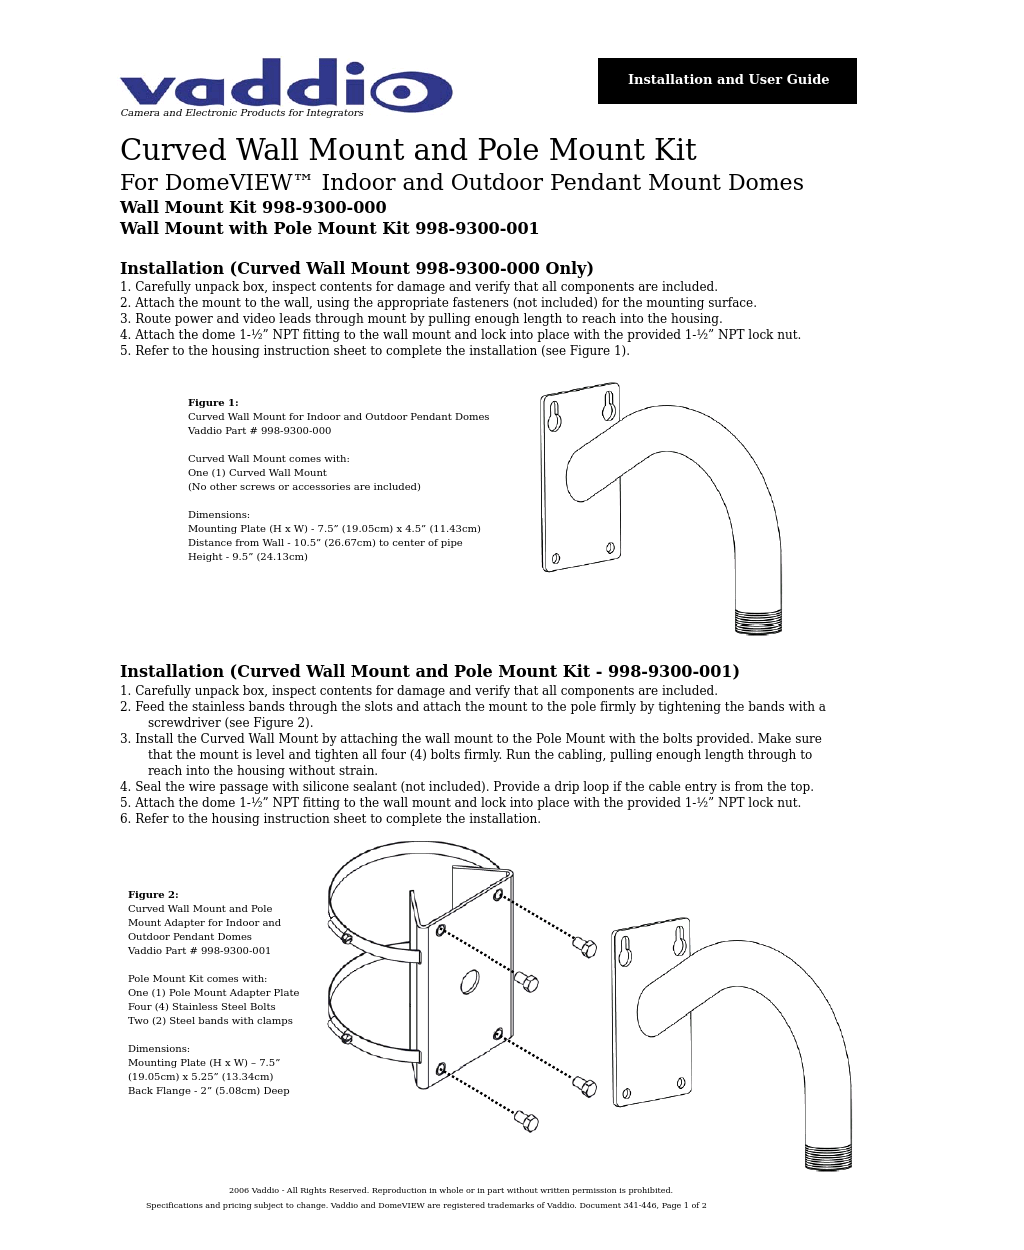 Wall Mount and Pole Mount